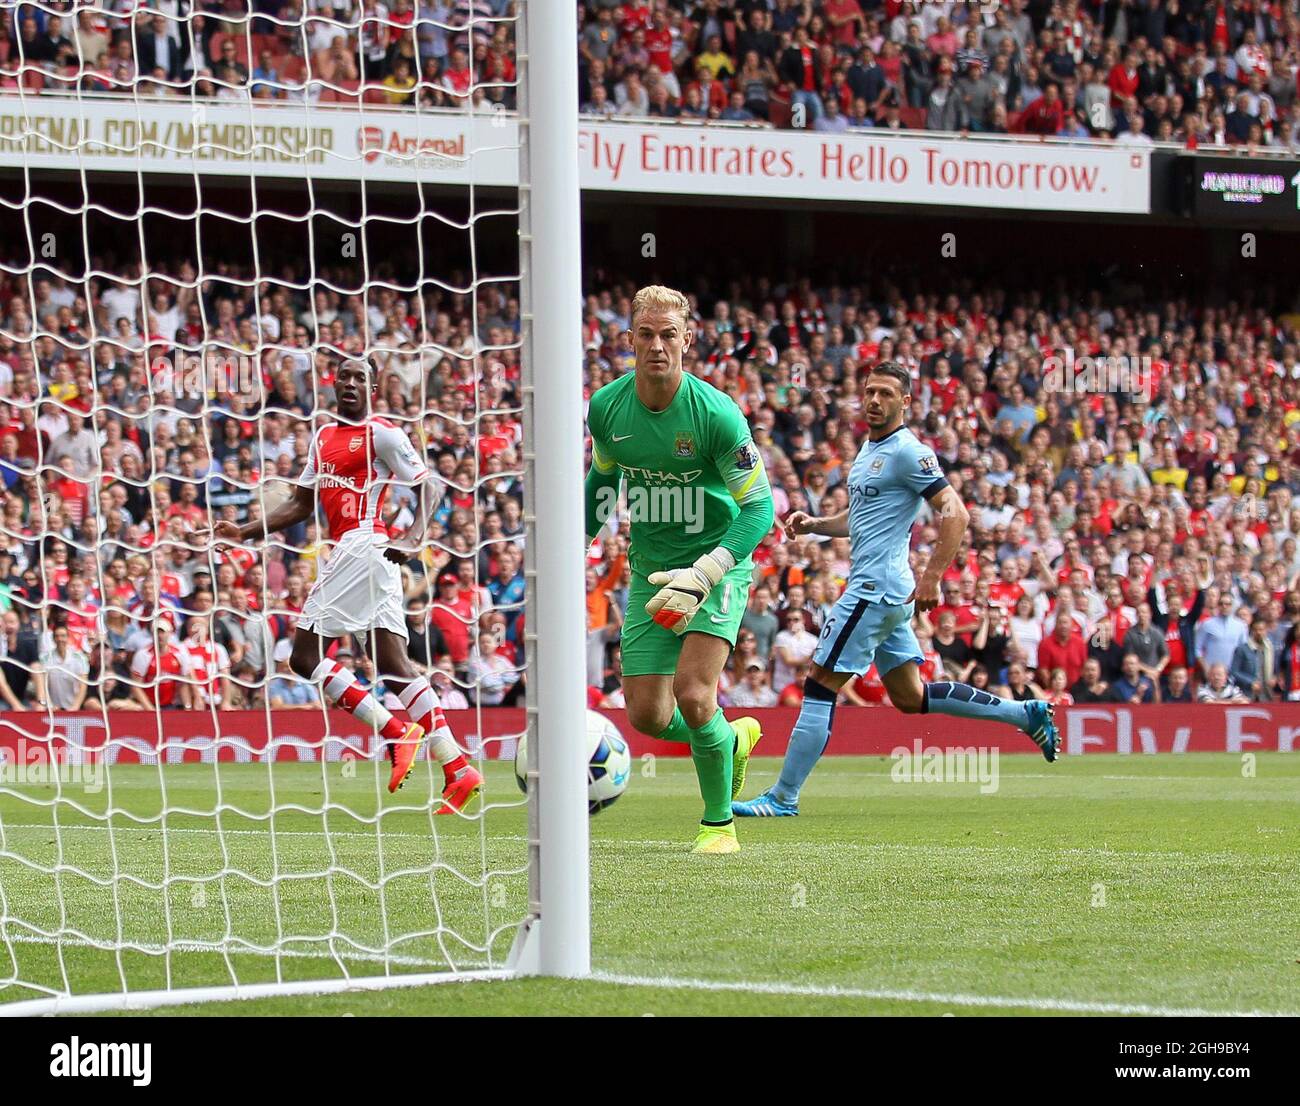 arsenals-danny-welbeck-watches-as-his-shot-hits-the-post-during-the-barclays-premier-league-the-match-between-arsenal-and-manchester-city-at-emirates-stadium-on-september-13-2014-2GH9BY4.jpg